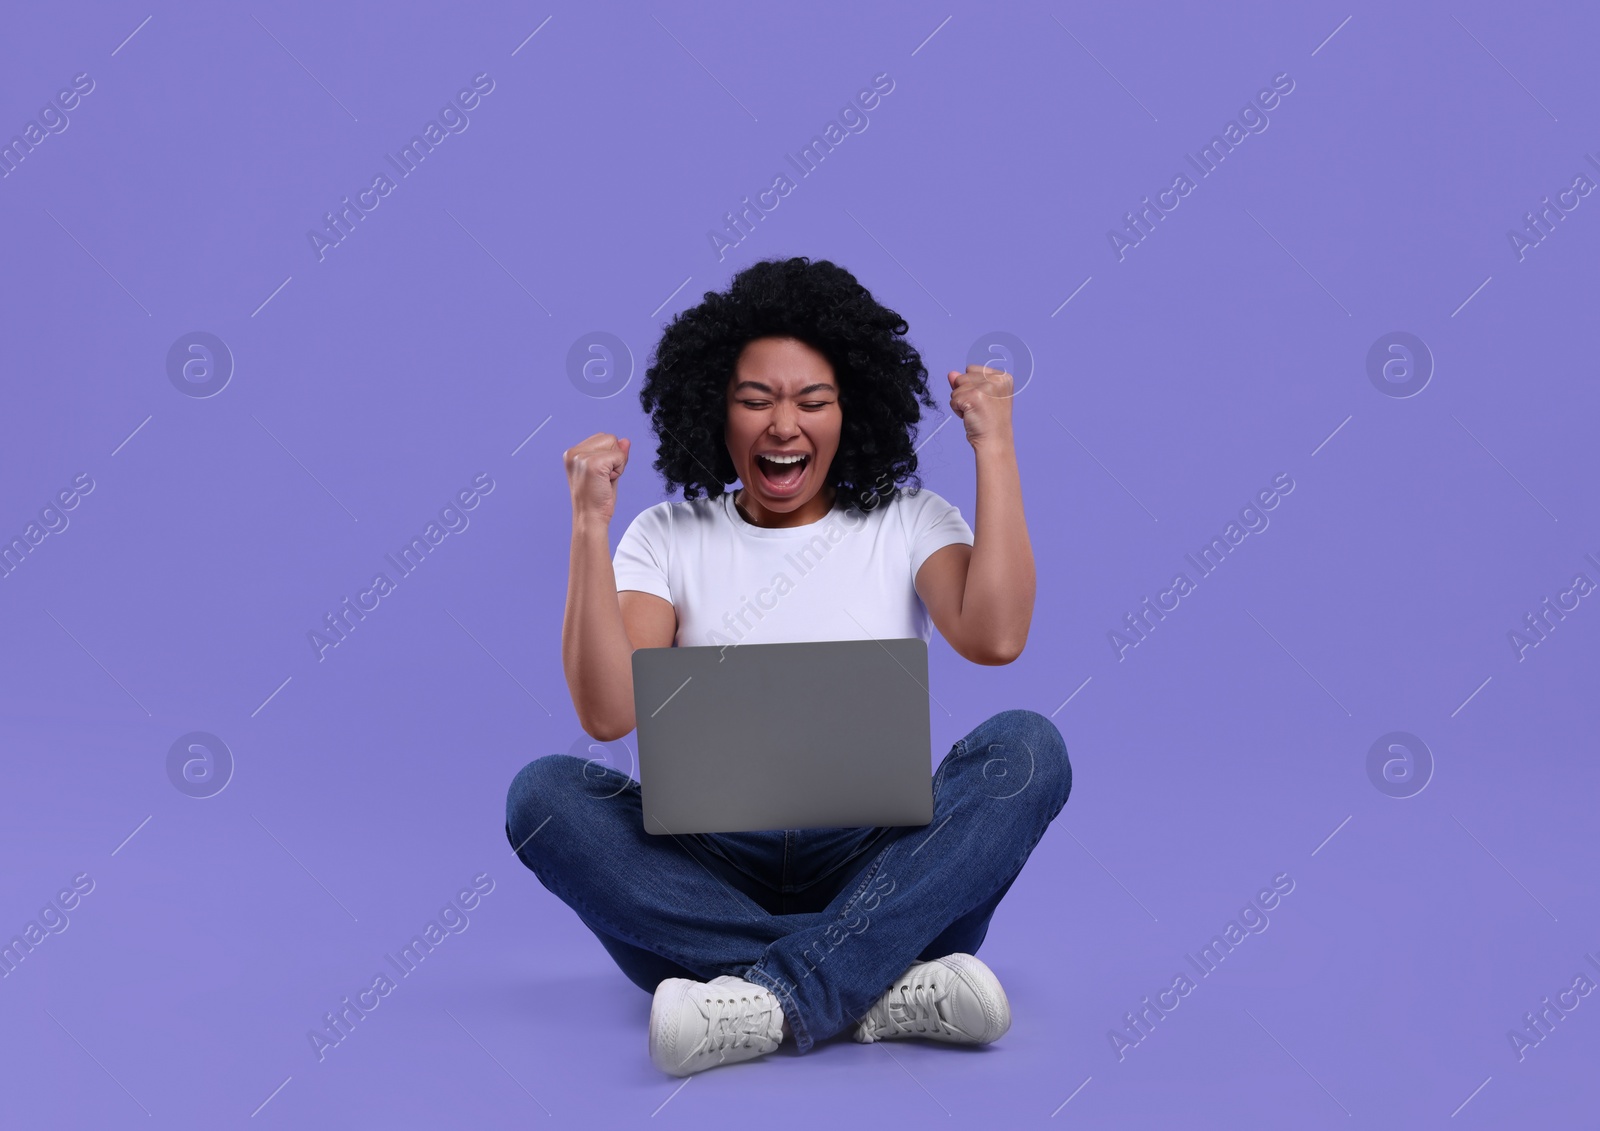 Photo of Emotional young woman using laptop on purple background